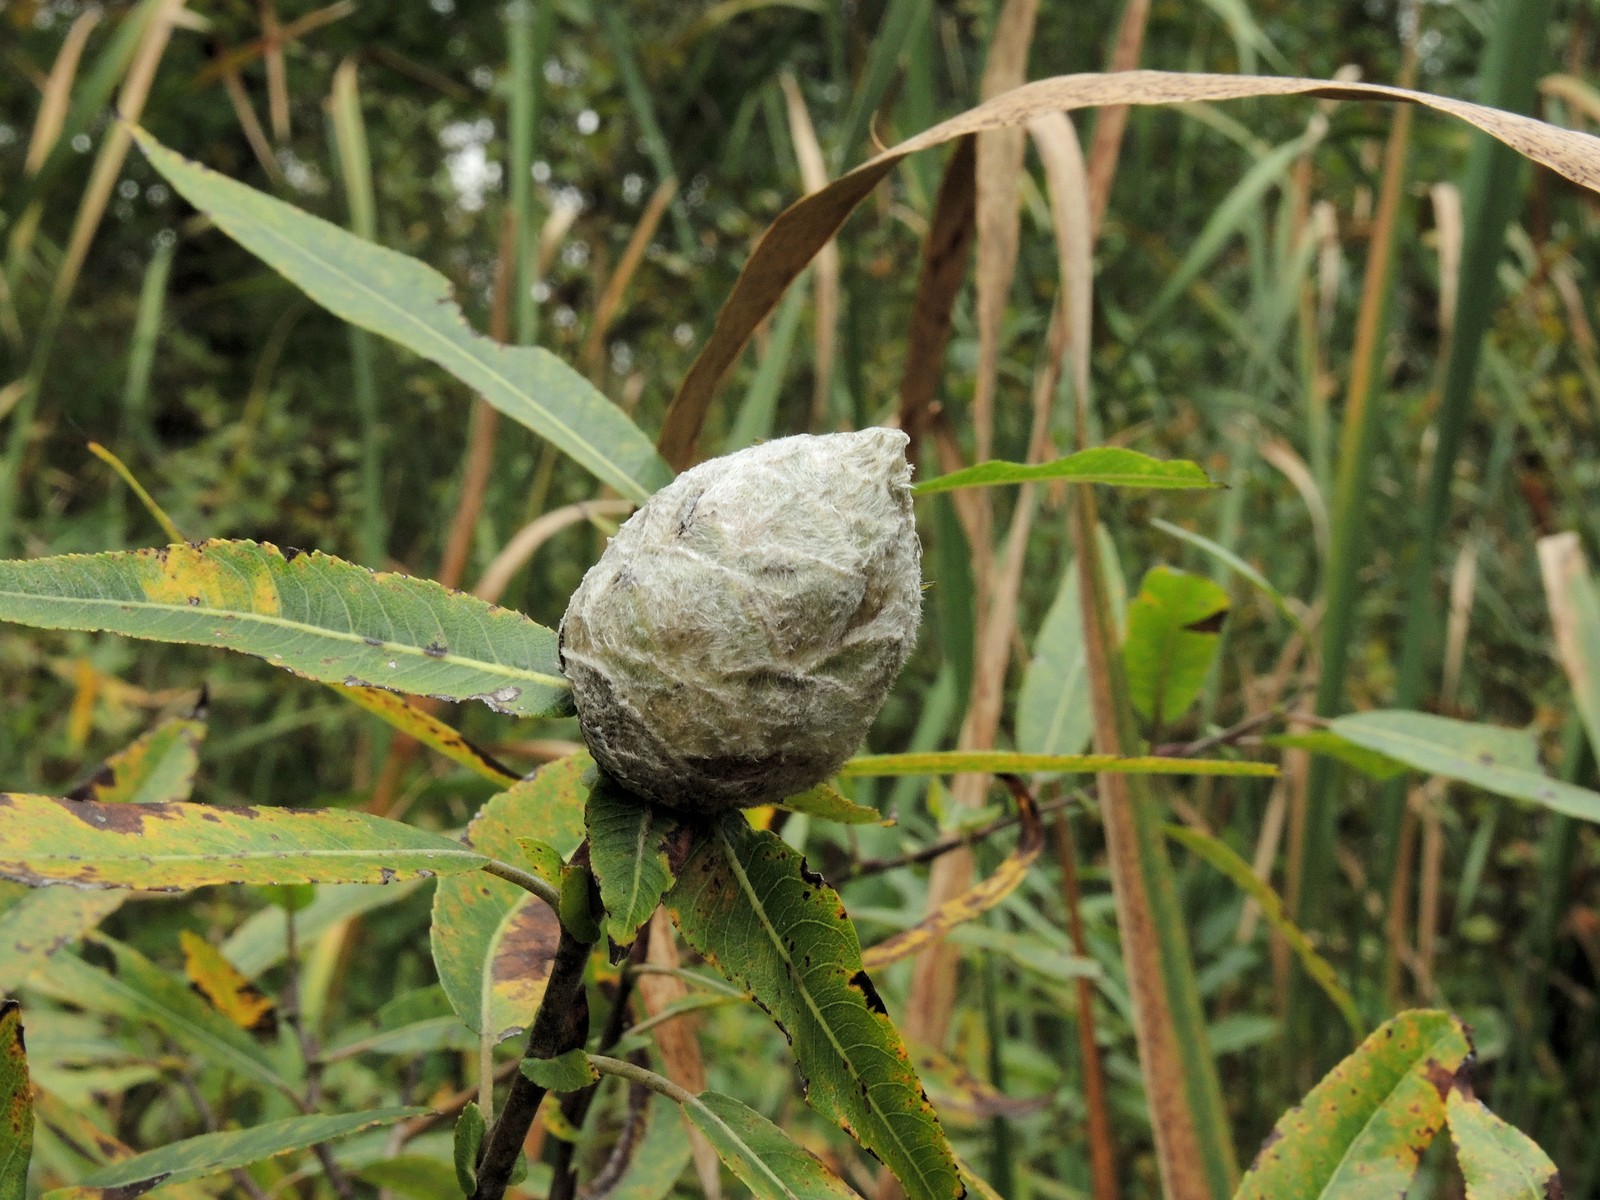 201510041511213034 Willow with pine cone willow galls caused by a tiny midge (Rhabdophaga strobiloides) - Bald Mountain R.A., Oakland Co, MI.JPG